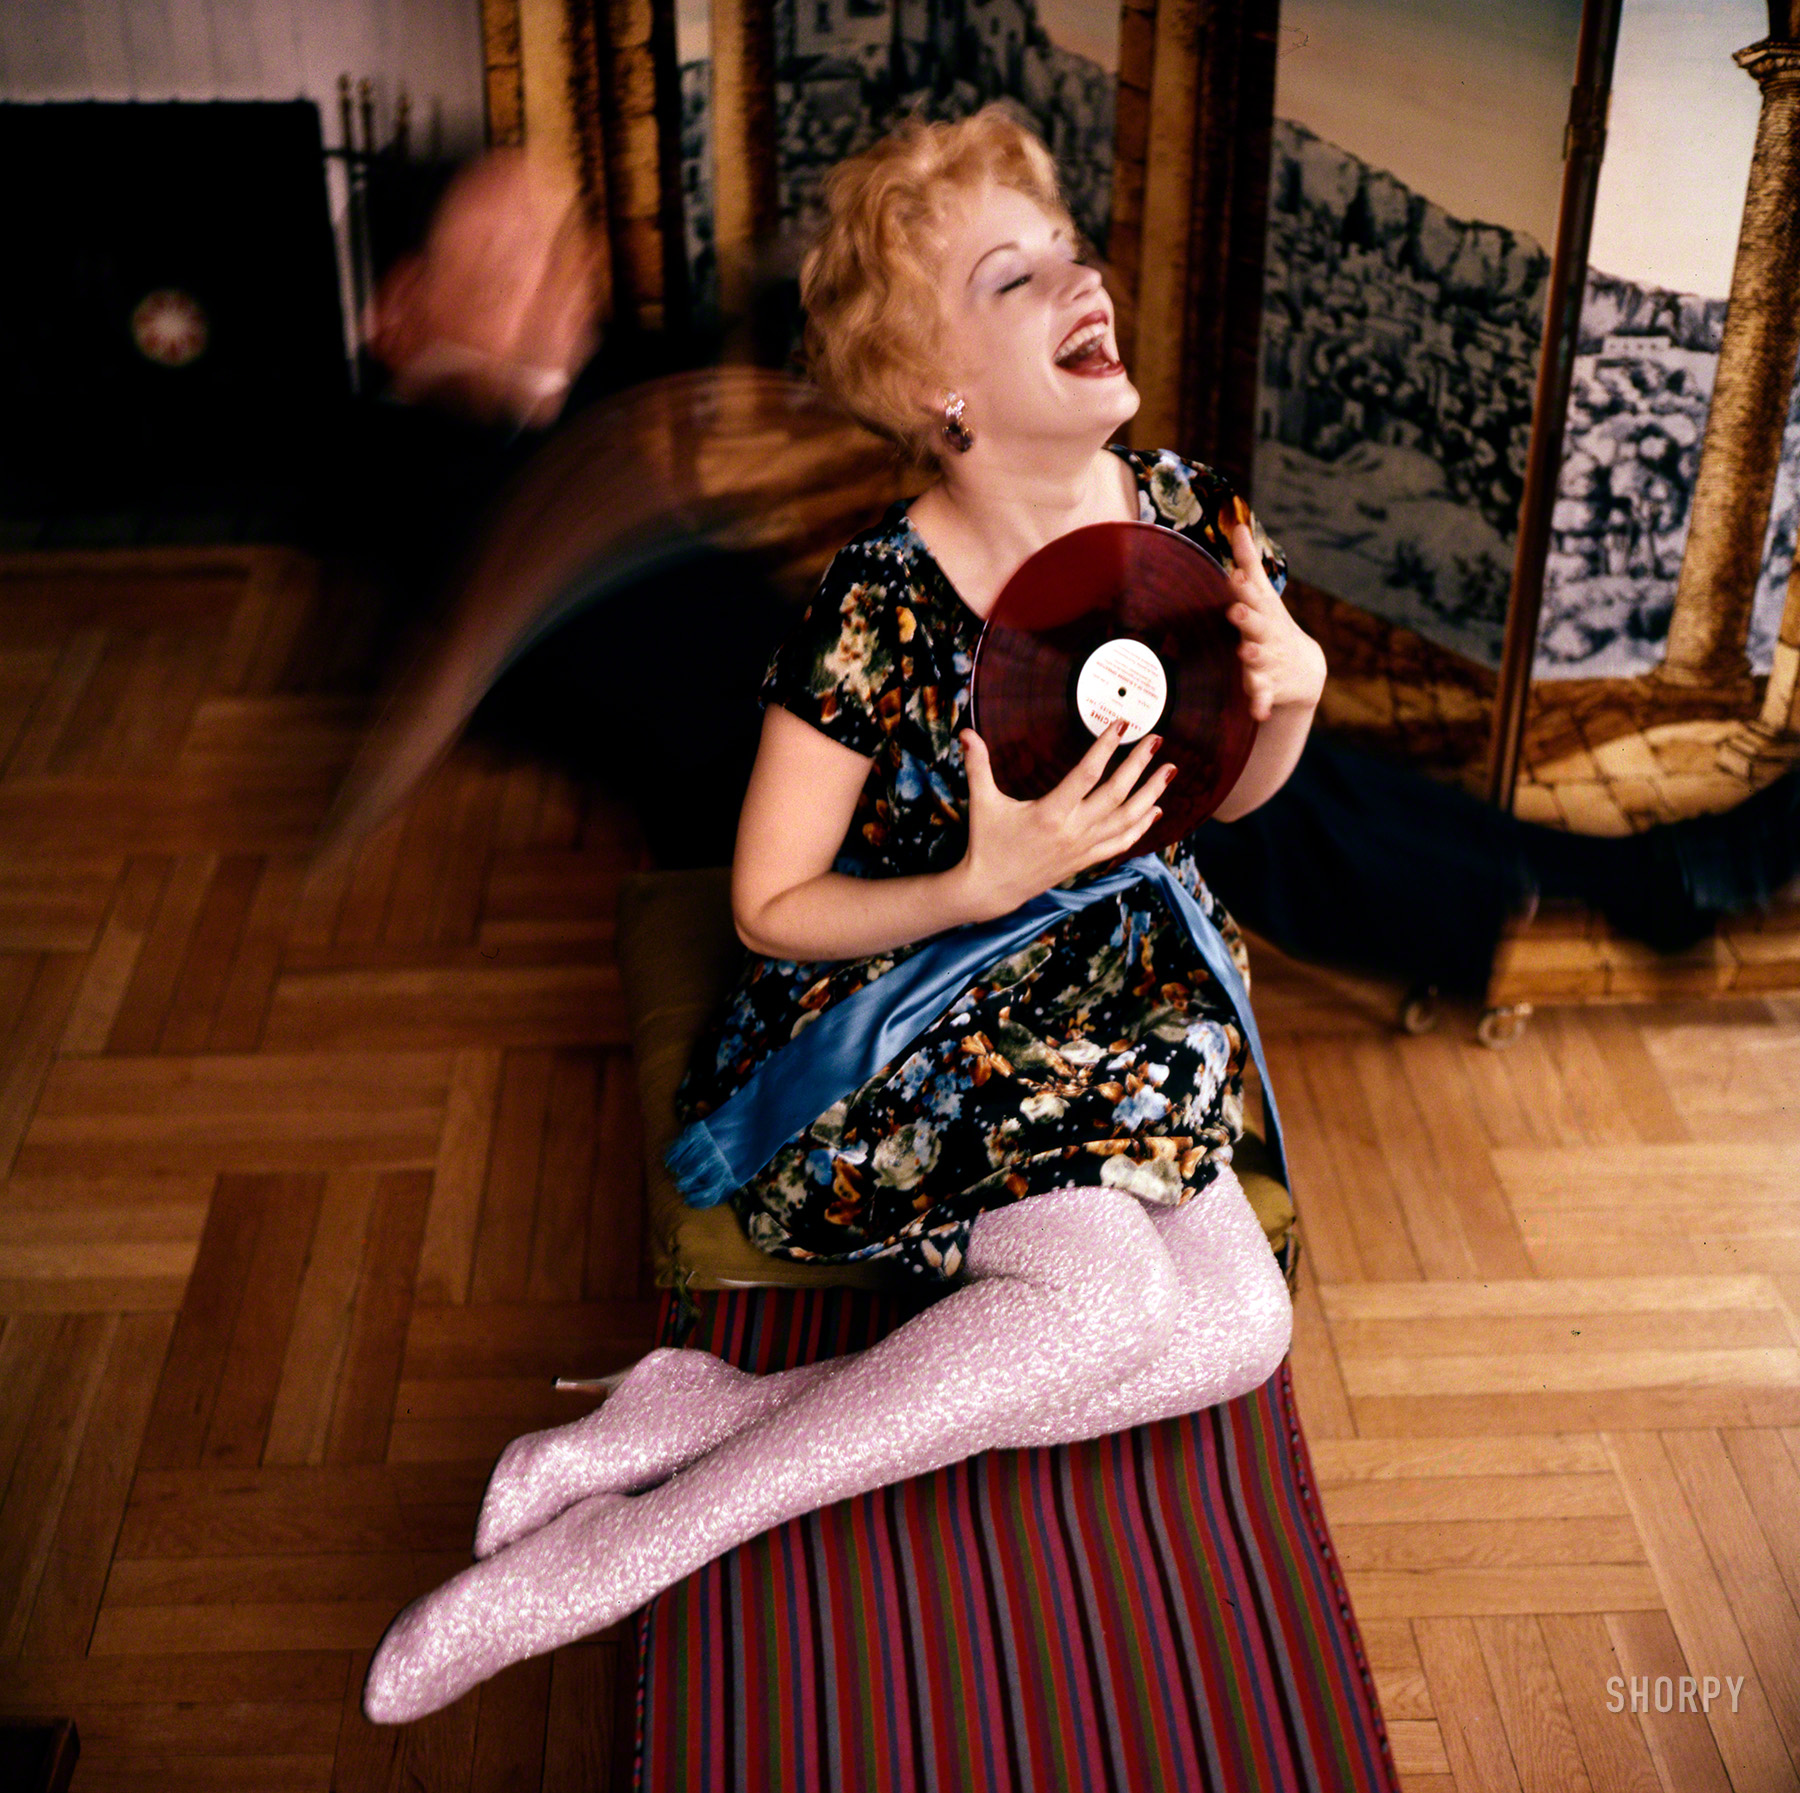 May 1958. "Actress Mary Ure wearing silver lamé, thigh-high leg covering with attached heels." The record is  Norgine Laboratories' 78 rpm pressing of Marin Marais's "Tableau of a Bladder Operation." Color transparency from the Look magazine assignment "For Women Only: Crazy With the Heat." View full size.